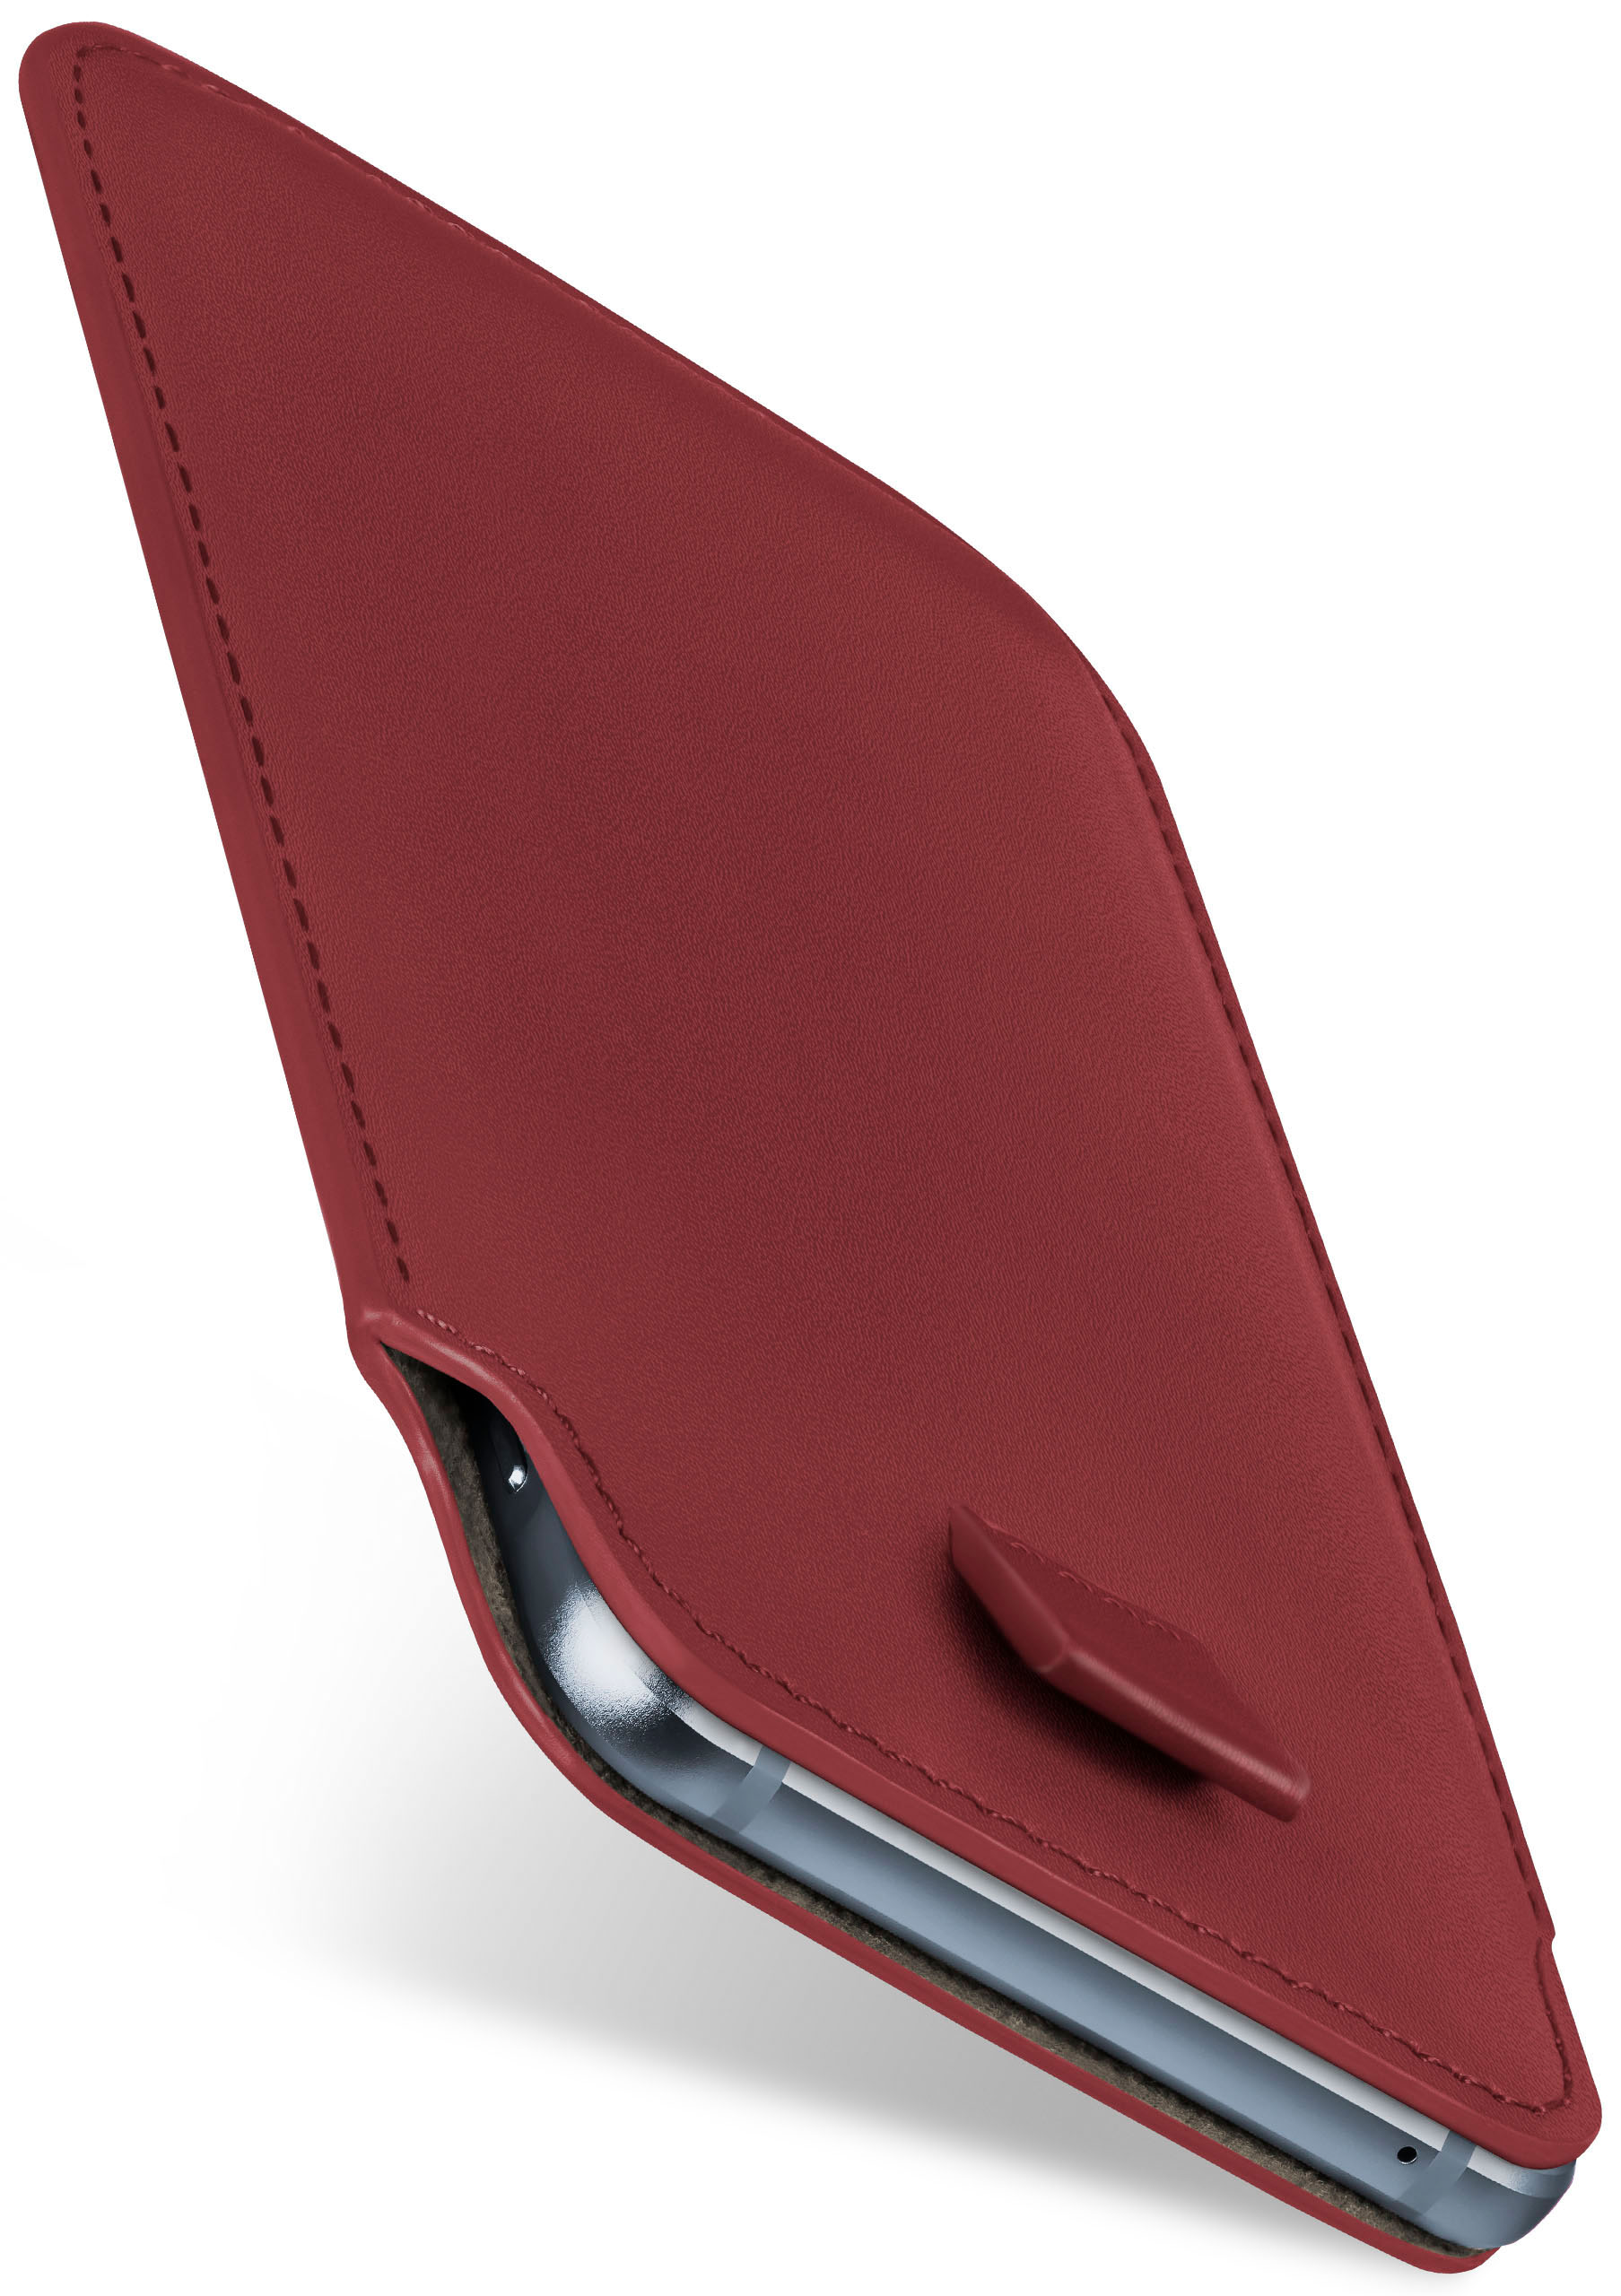 Case, Full 113, MOEX Slide Maroon-Red Cover, Nokia,